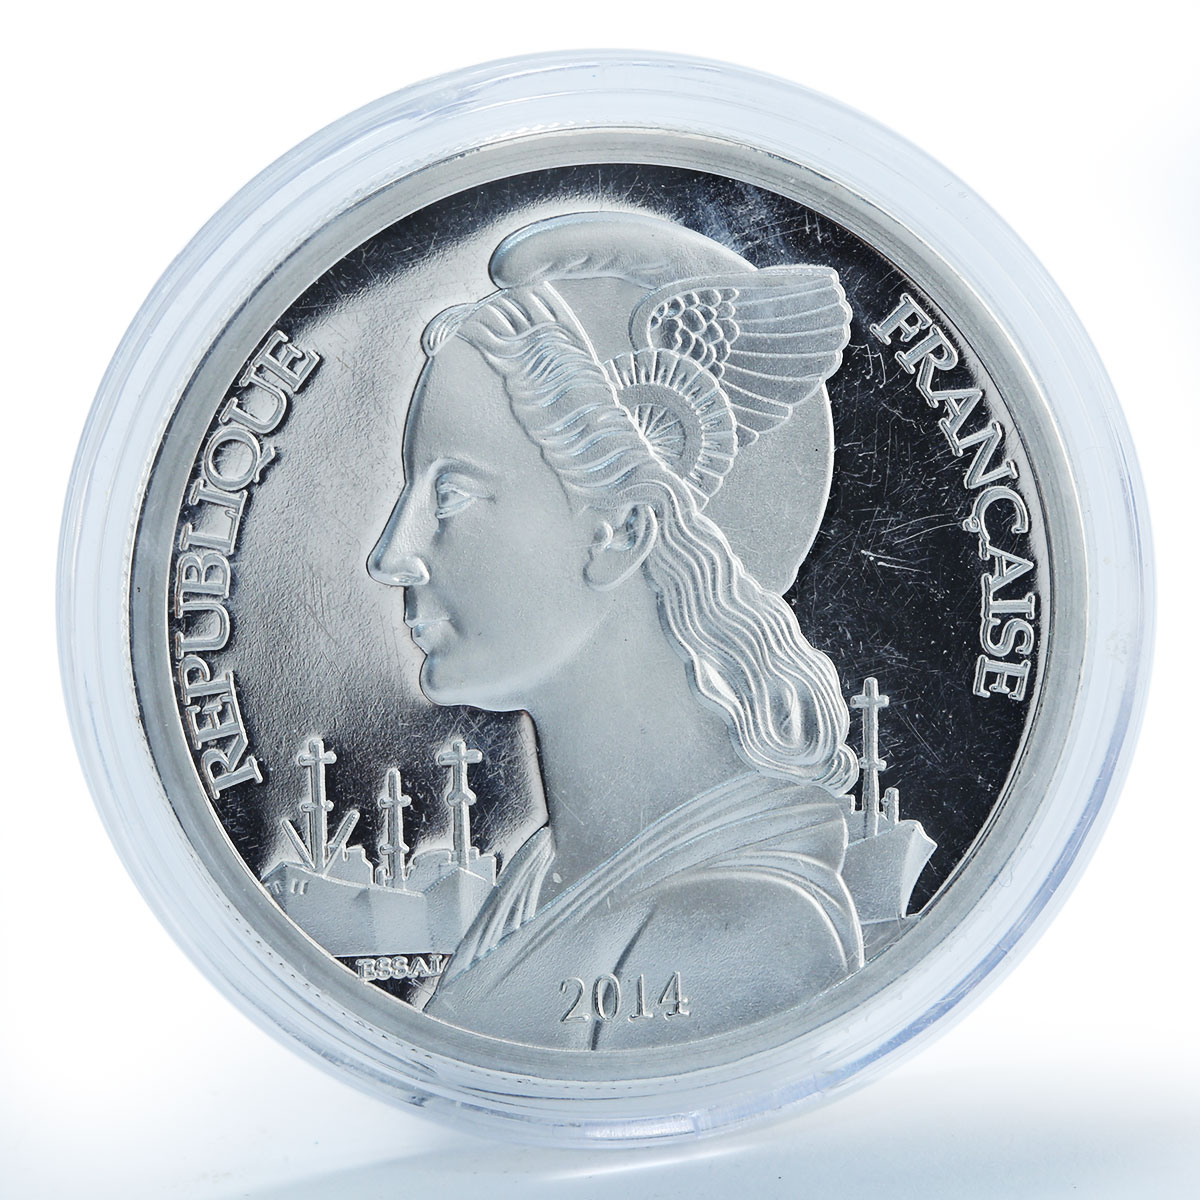 Gambier Island 500 francs Institute Of Overseas Emission silver plated 2014